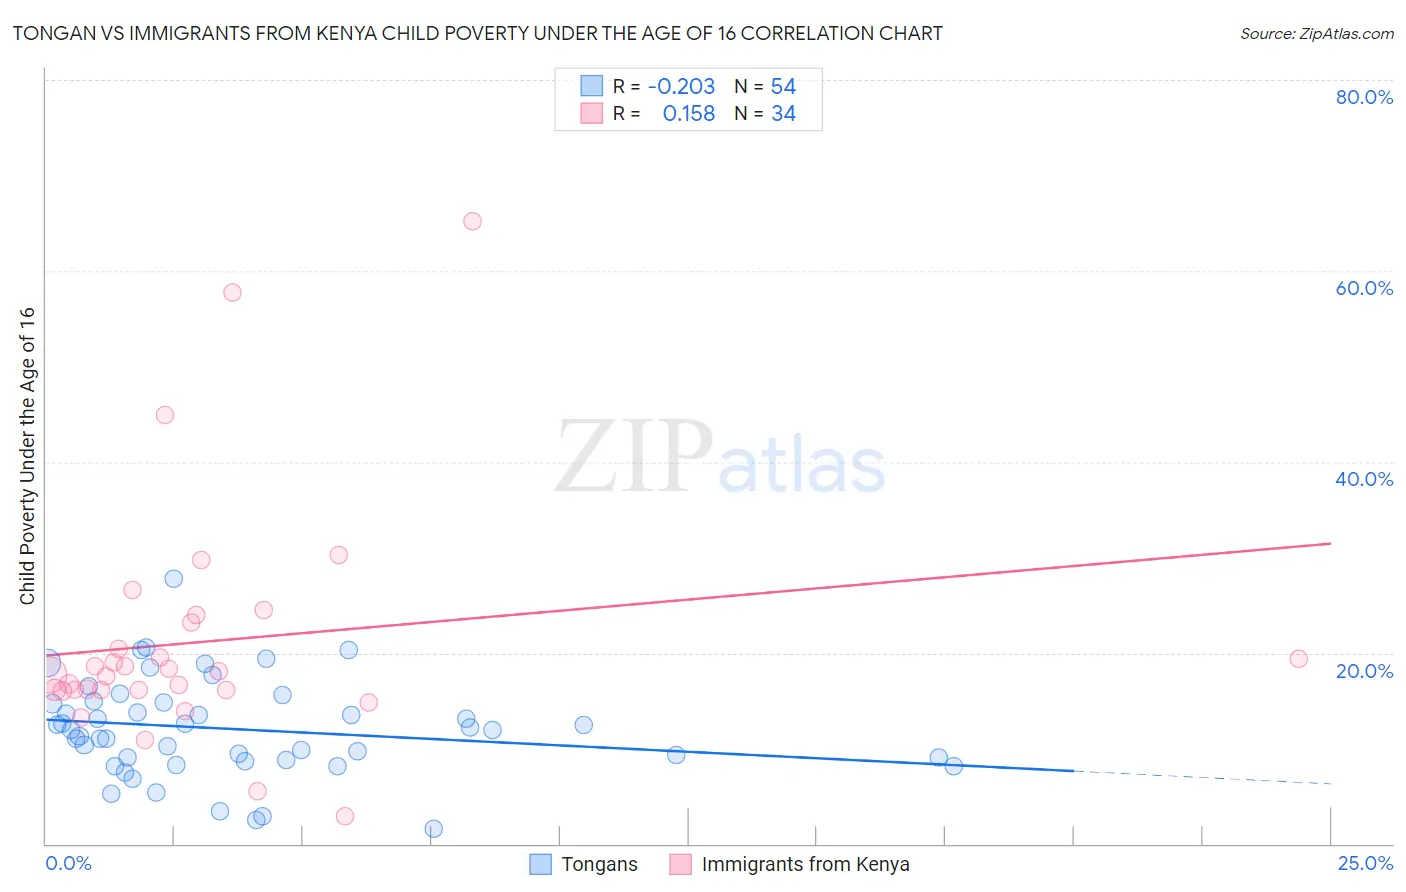 Tongan vs Immigrants from Kenya Child Poverty Under the Age of 16